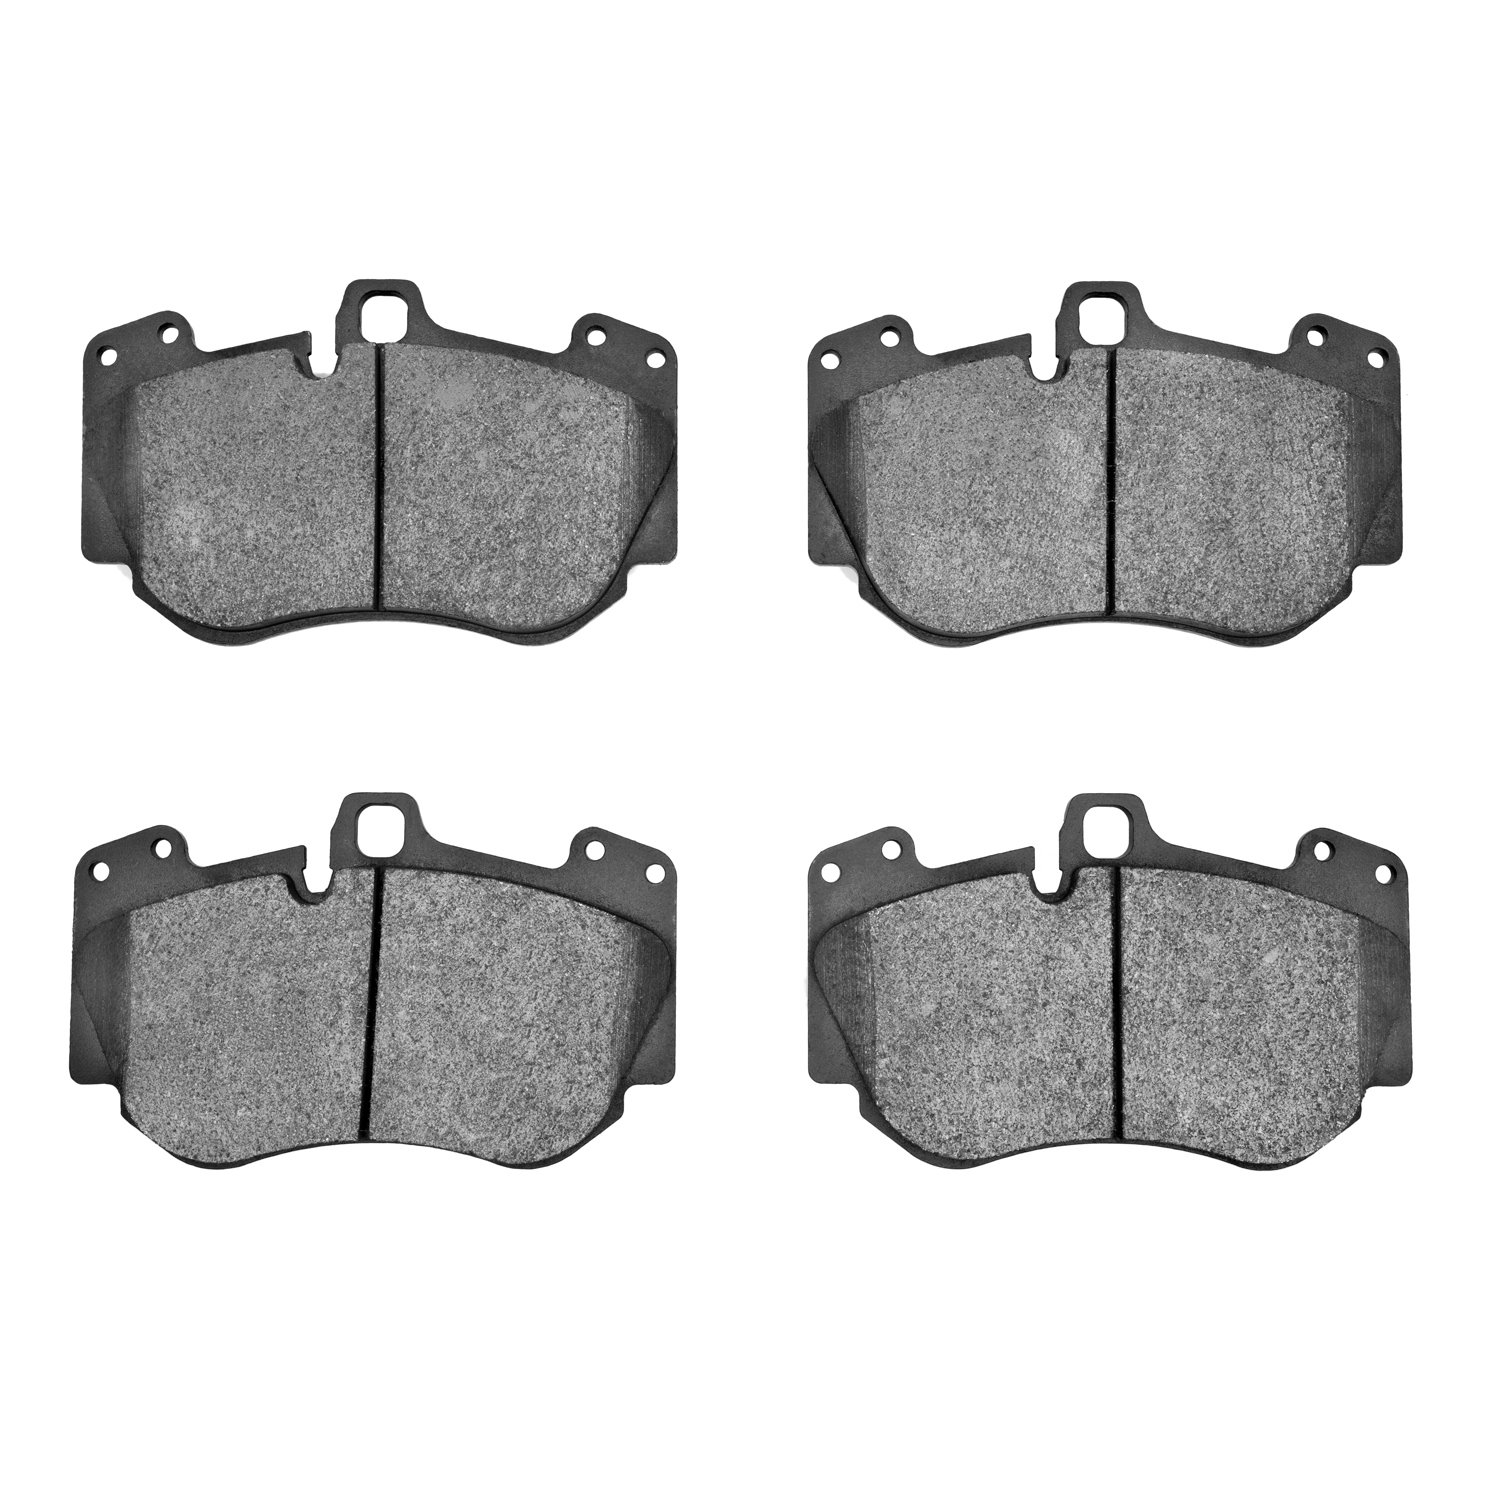 1311-1130-10 3000-Series Semi-Metallic Brake Pads, Fits Select Multiple Makes/Models, Position: Front